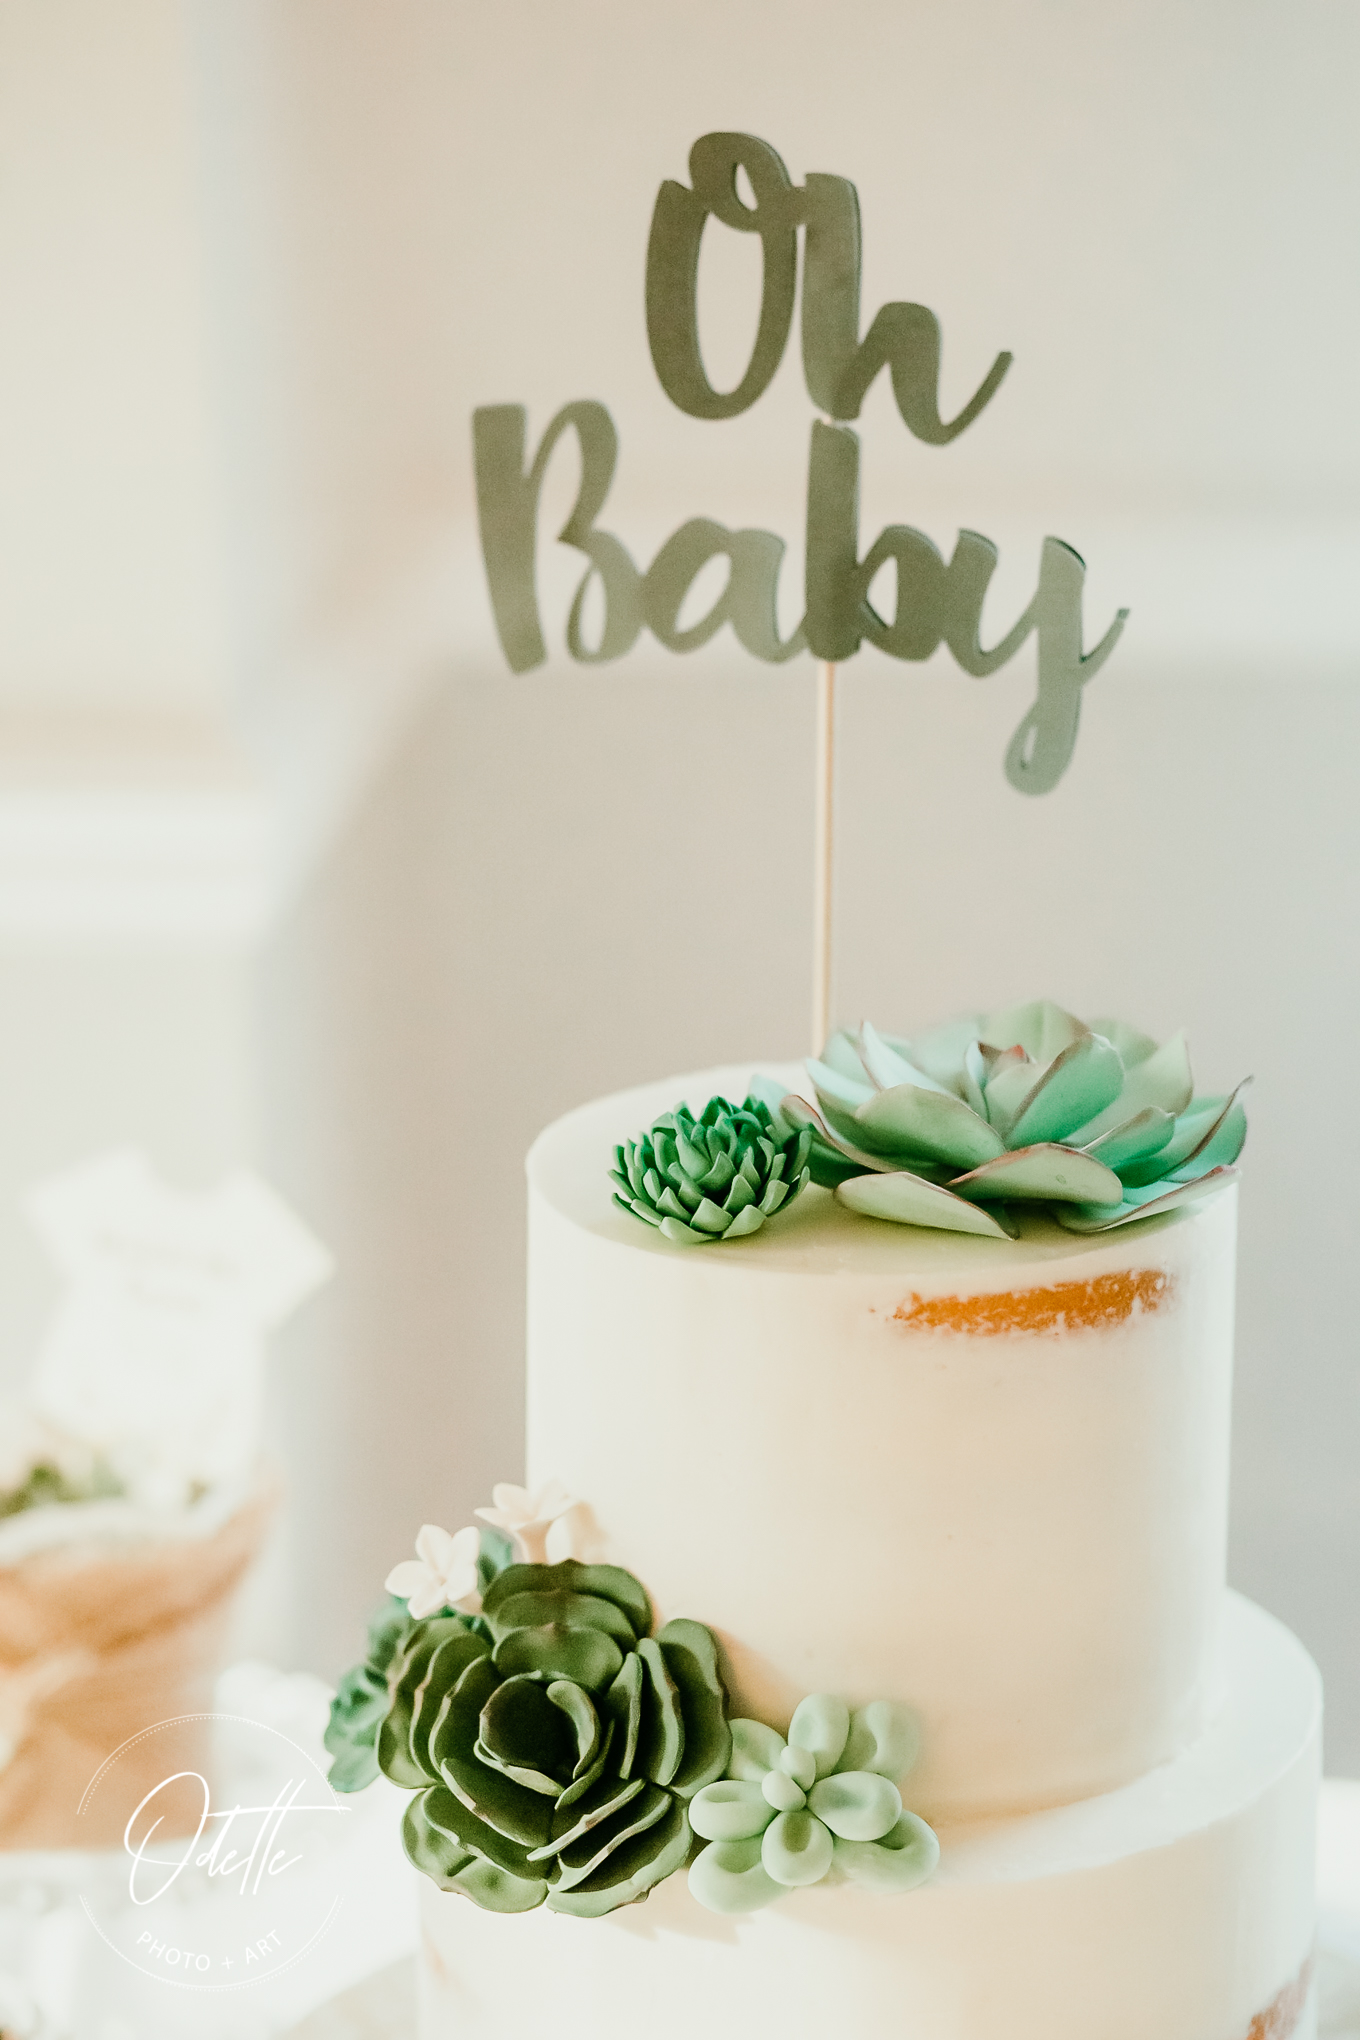 Event planning for a baby shower